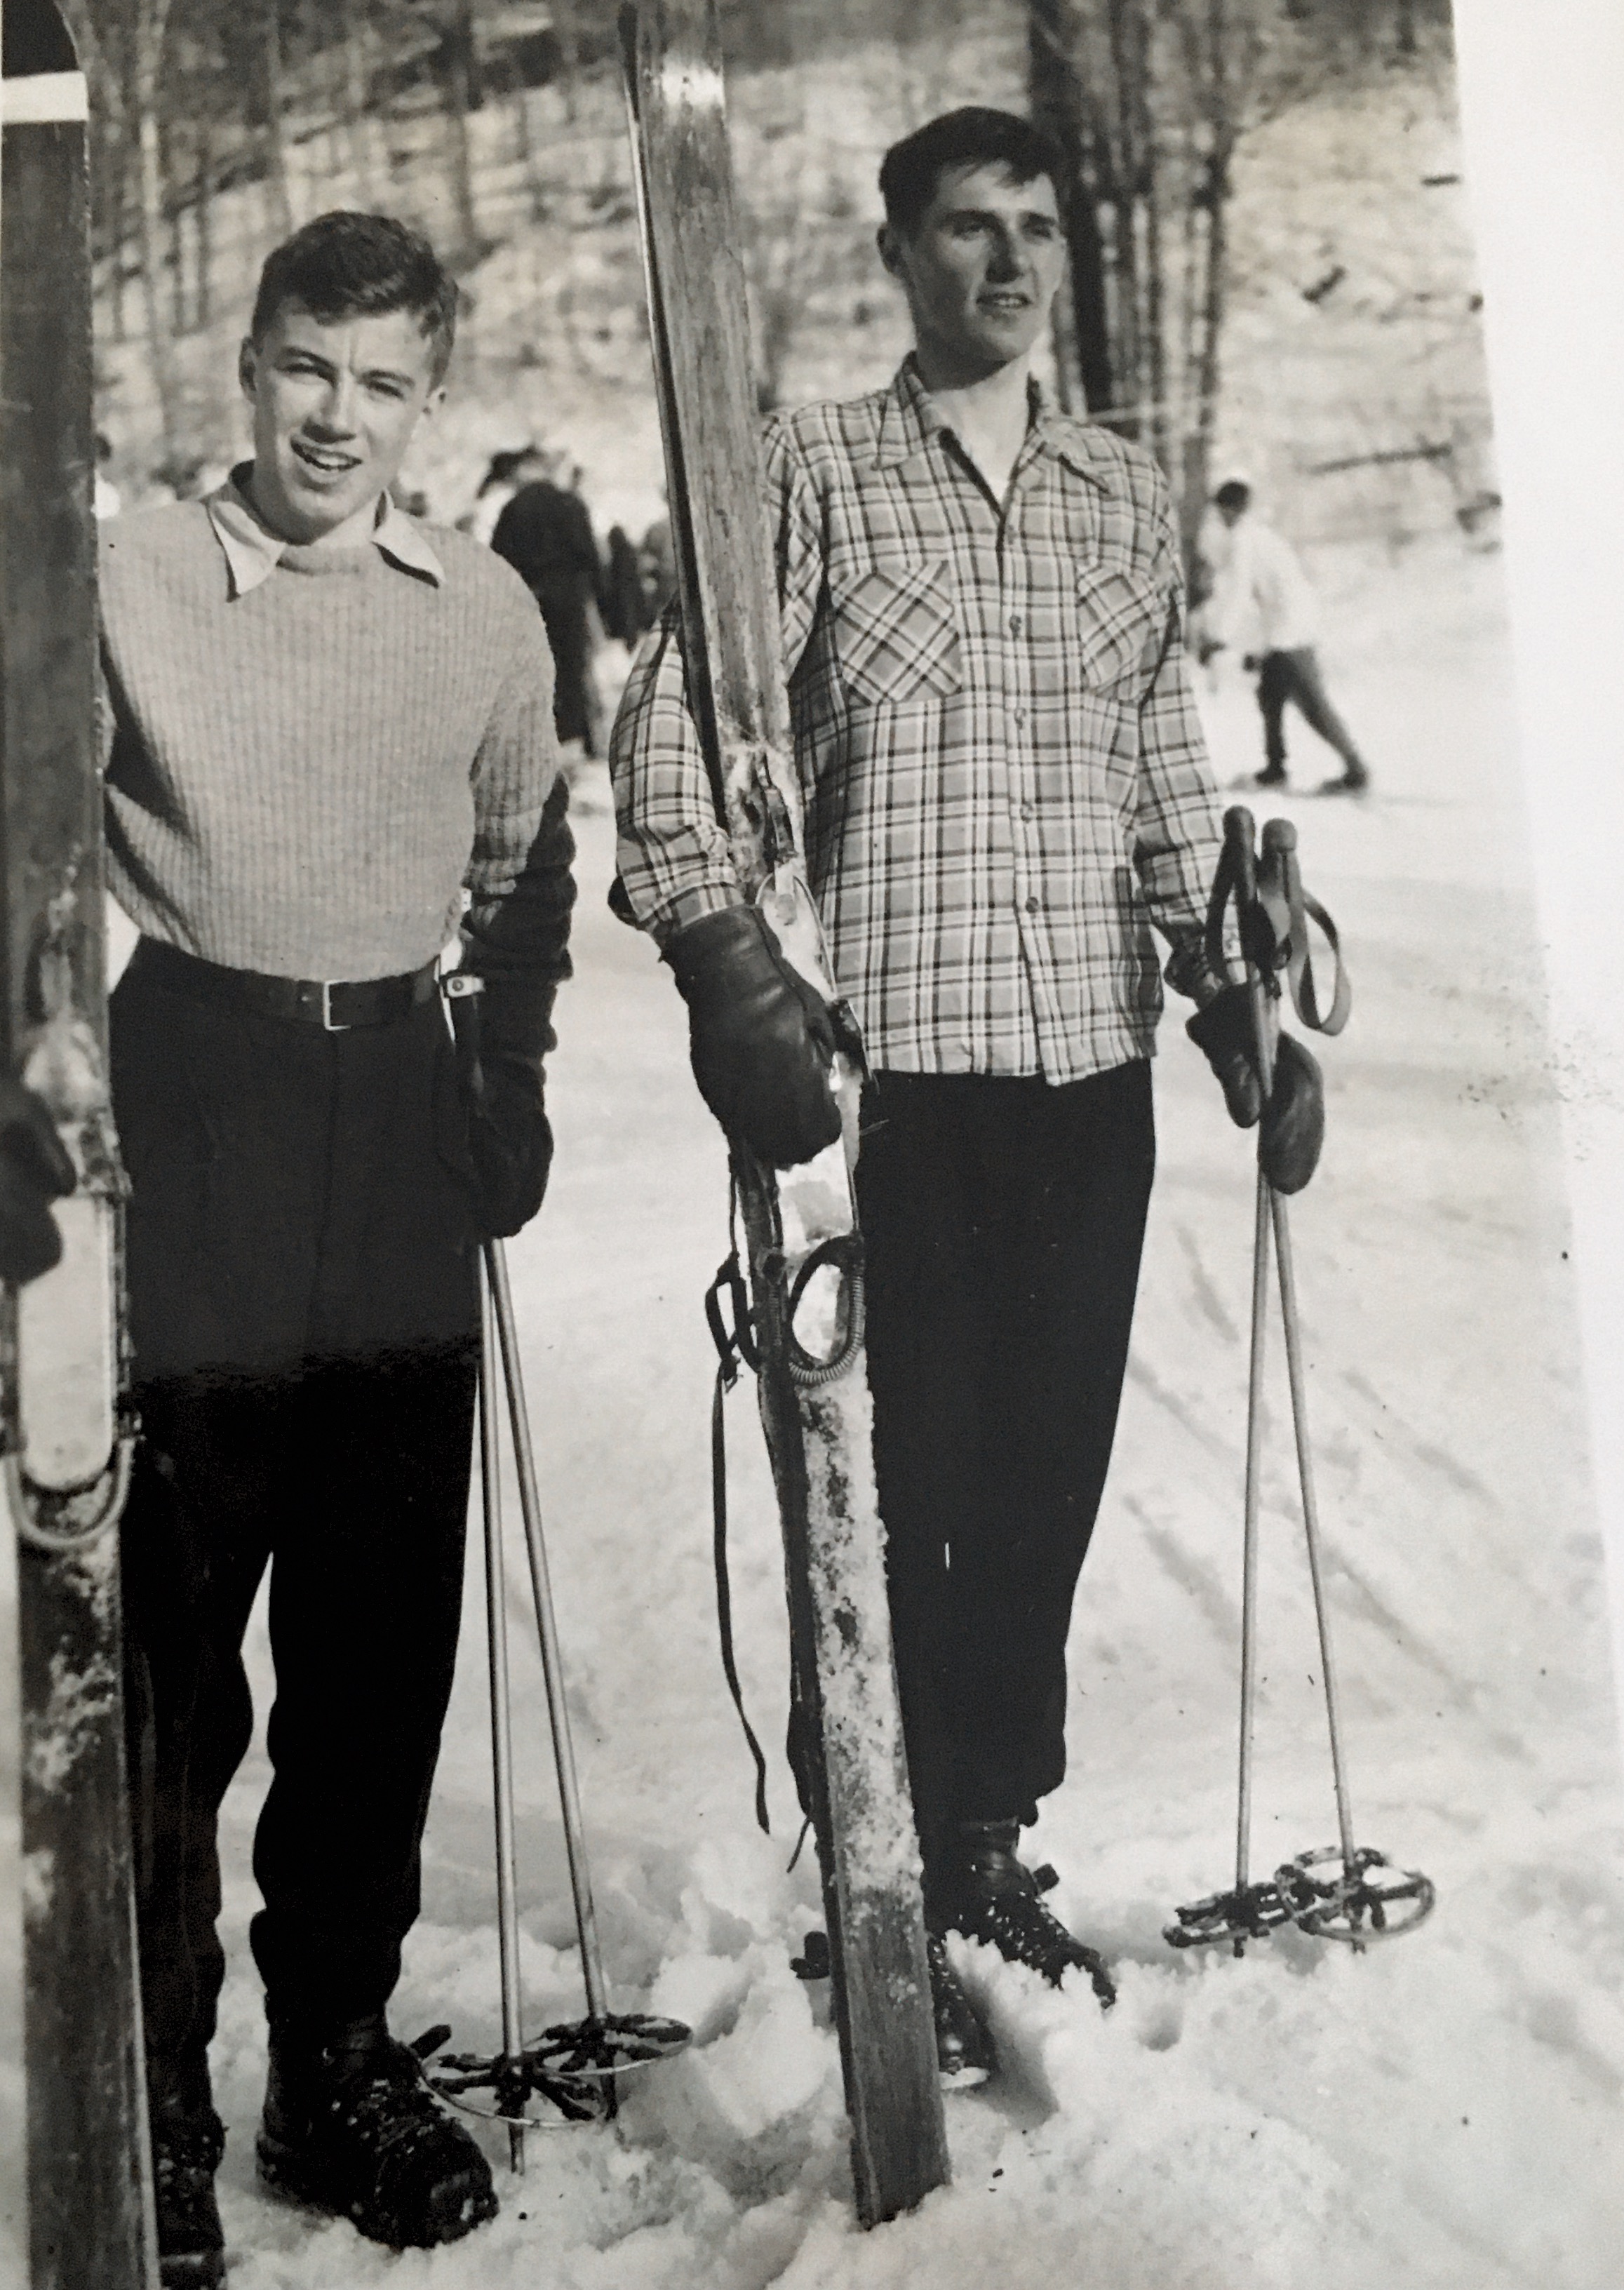 1940’s. “Pete Gaulin” and uncle André Laframboise